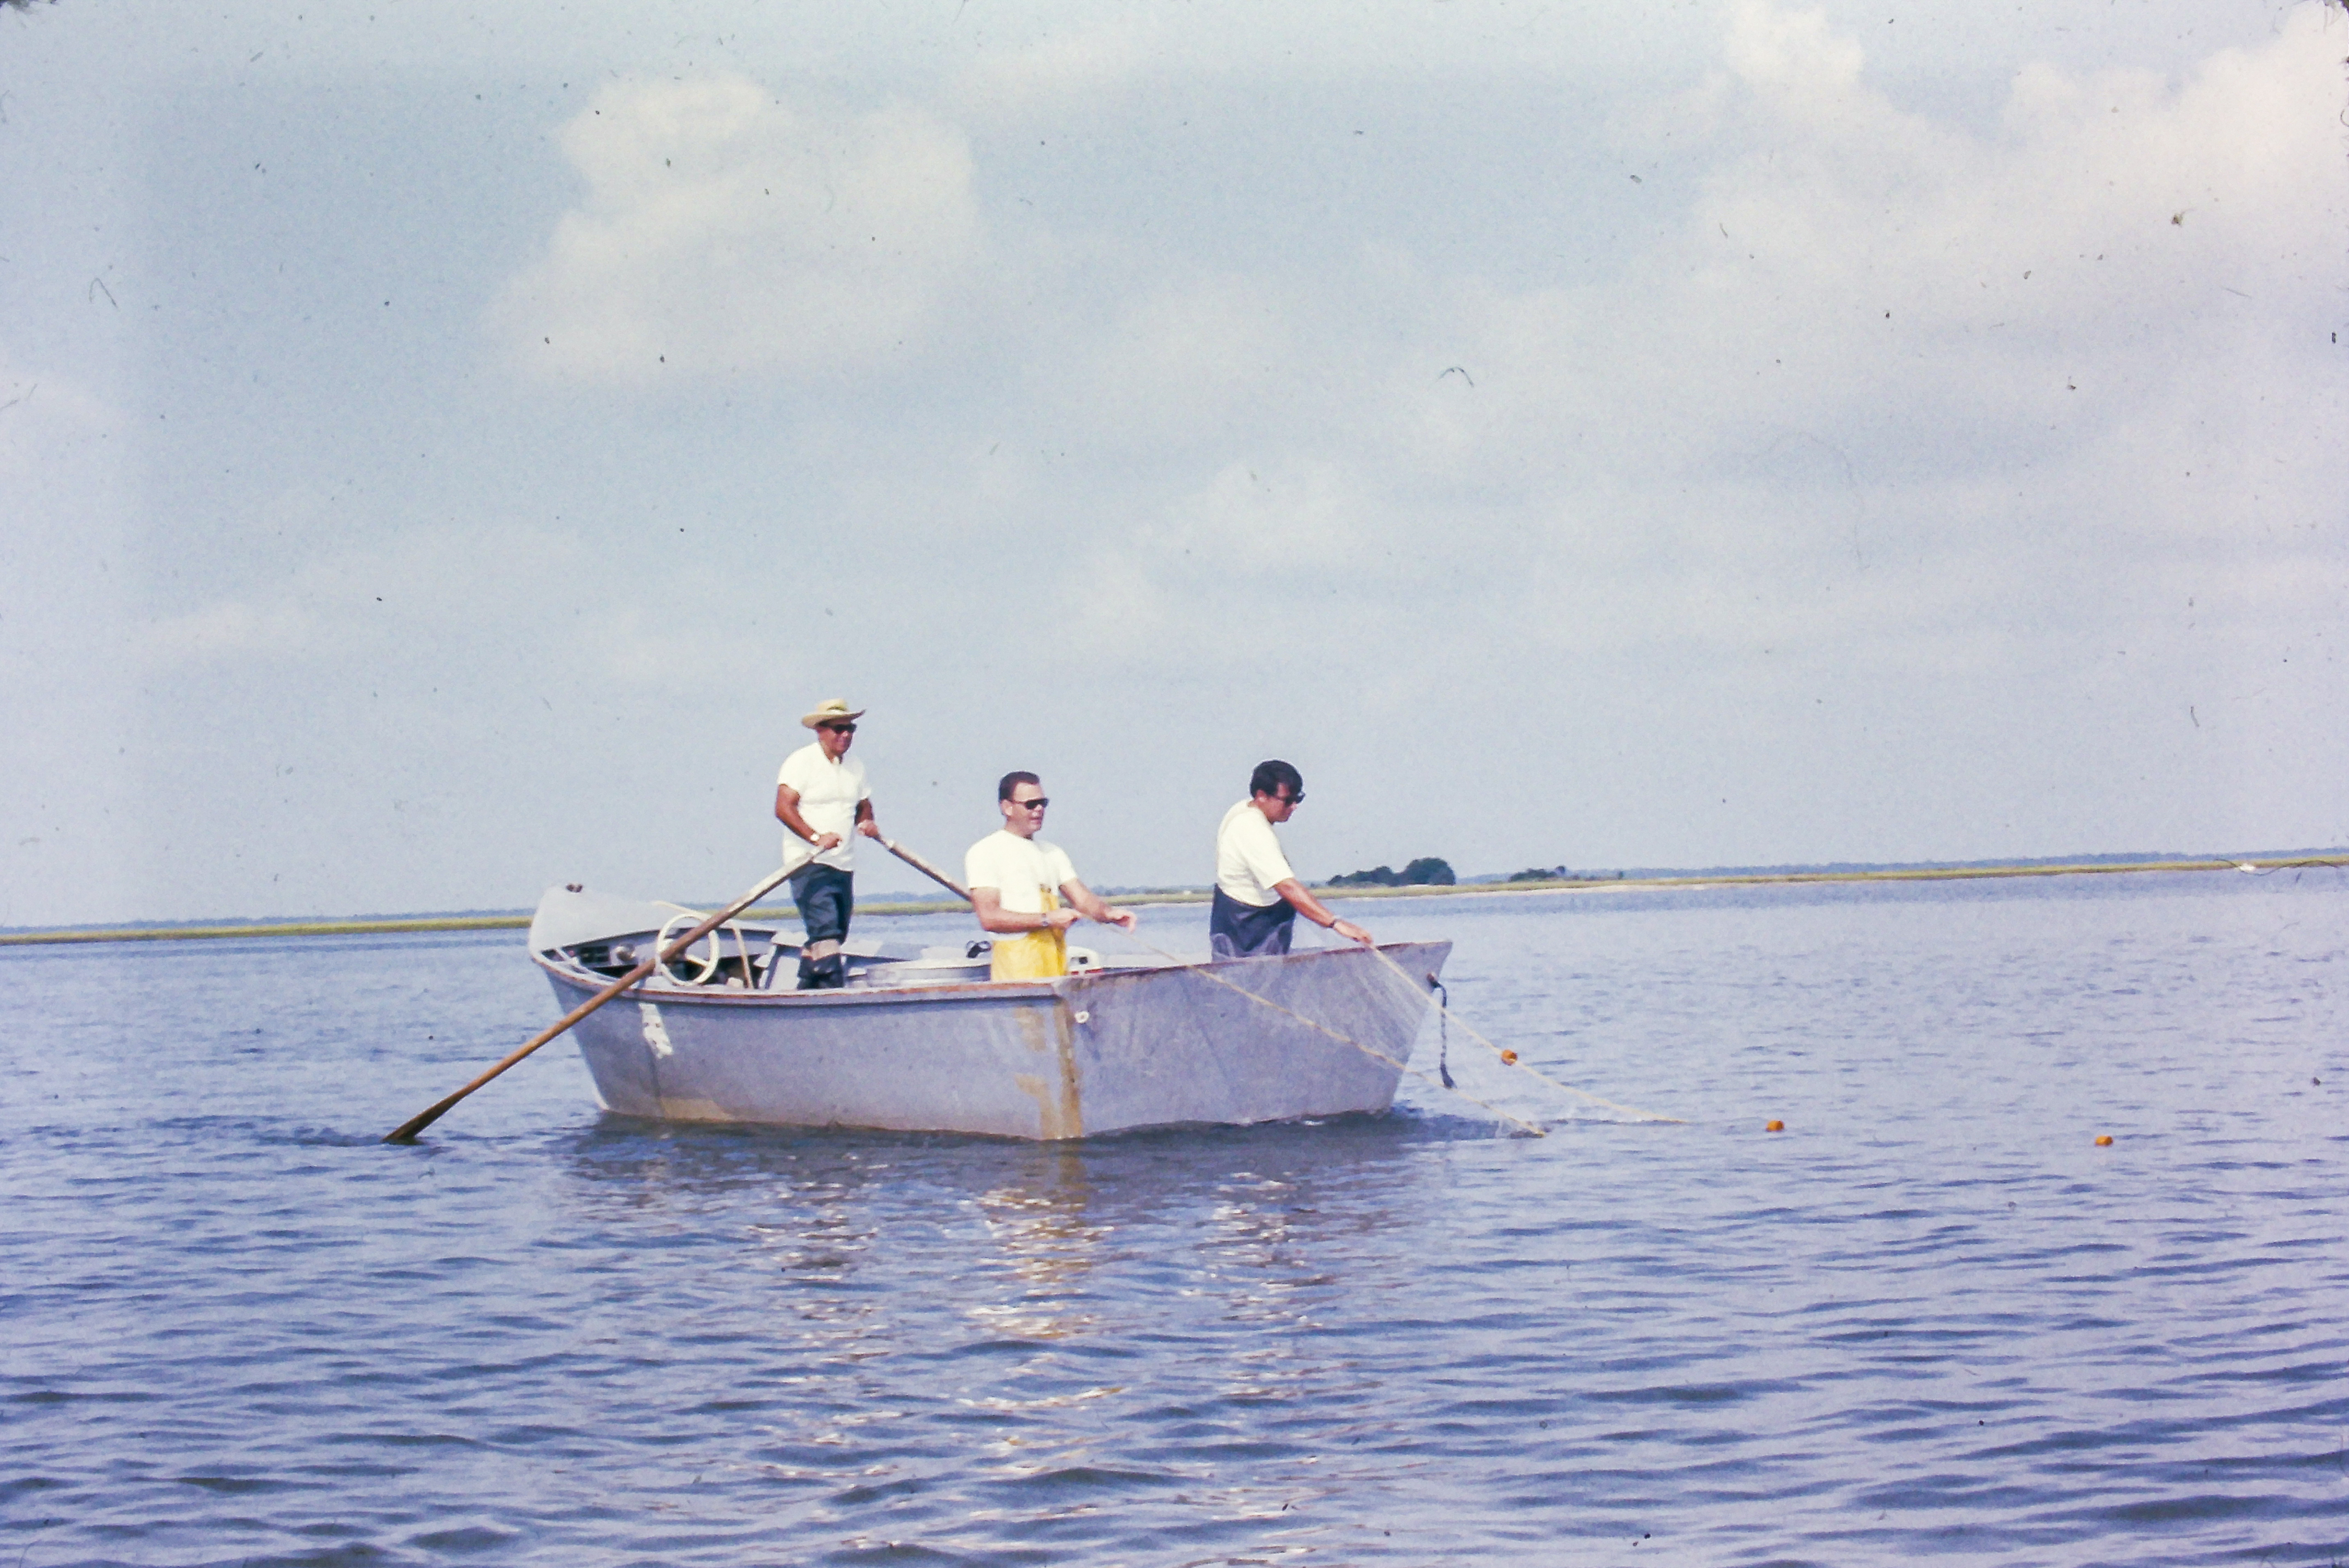 Jim Music, far right, helps pull in a gillnet with the late Capt. Pard Andrew (far left), and marine biologist Bobby Palmer as part of a total estuarine species inventory survey circa 1971.